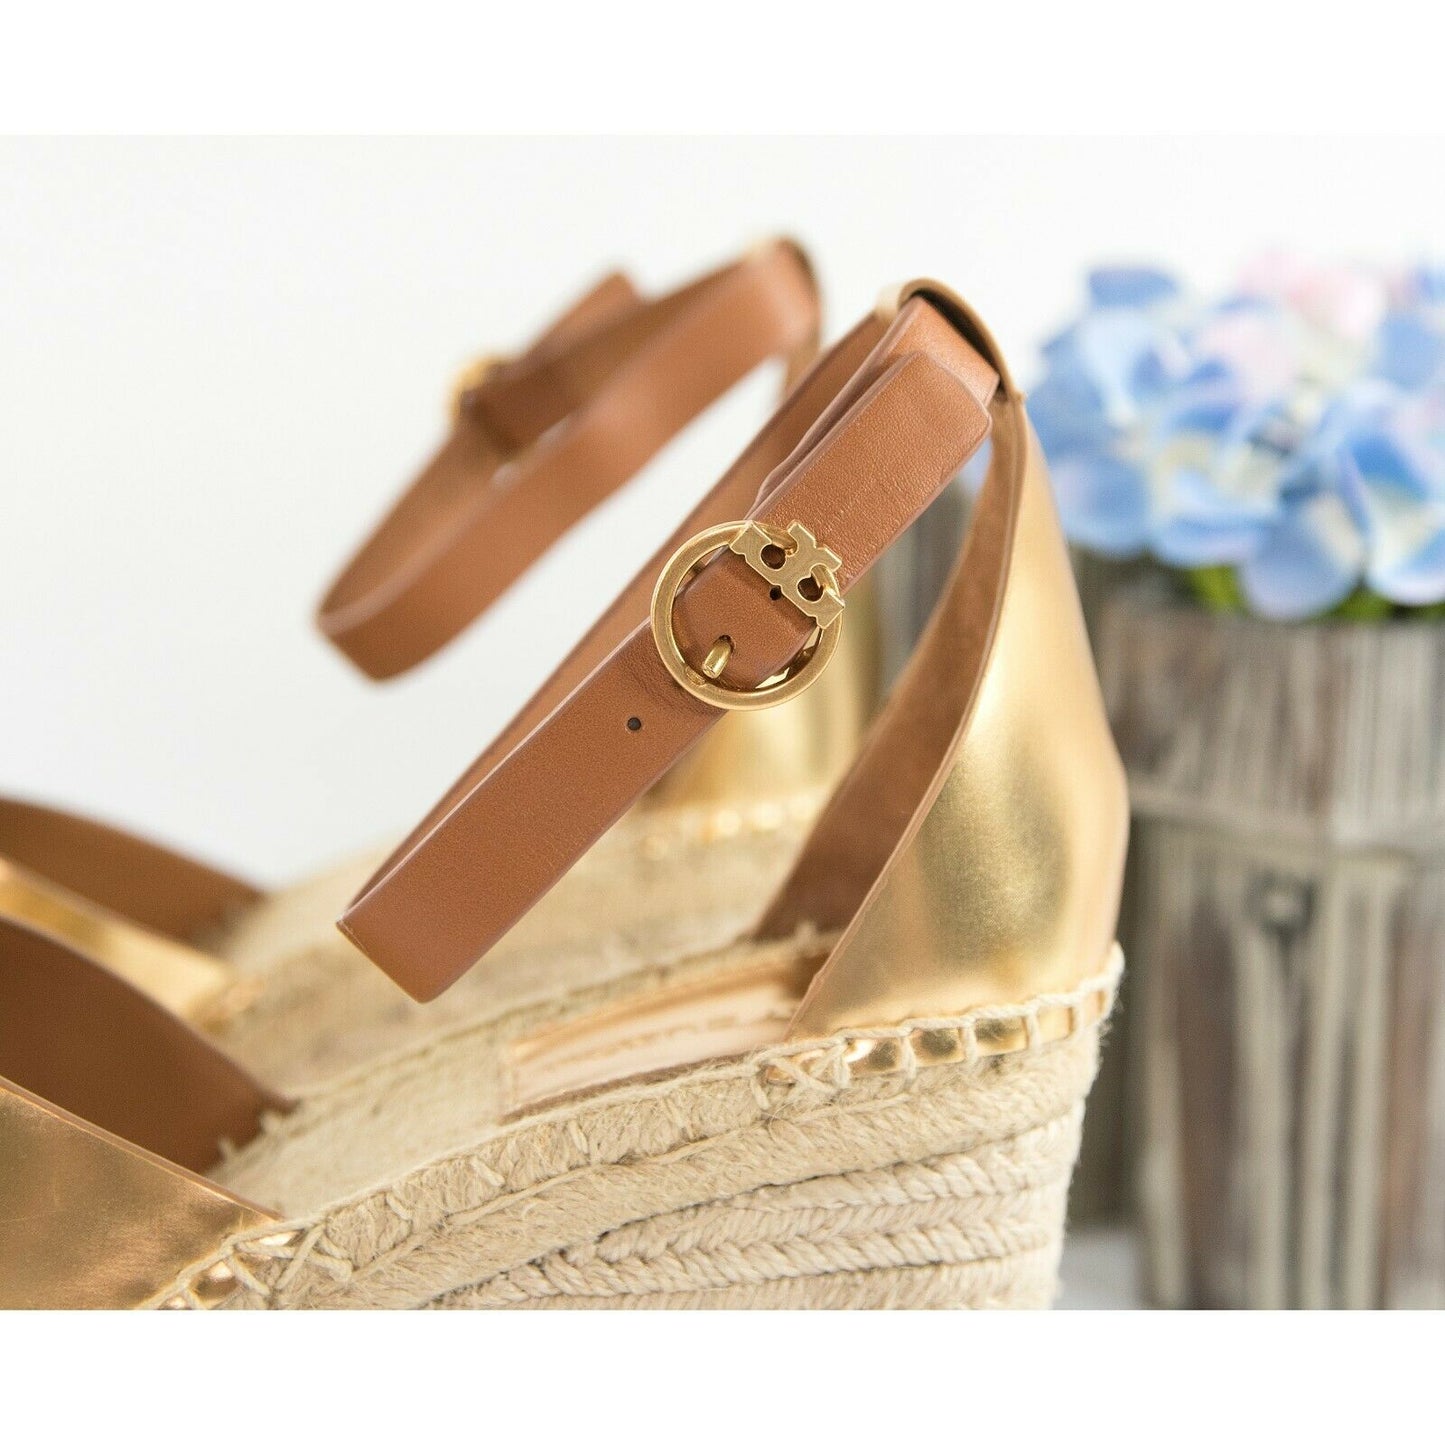 Tory Burch Selby 105MM Old Gold Calf Leather Platform Espadrille Wedge Heels 9.5